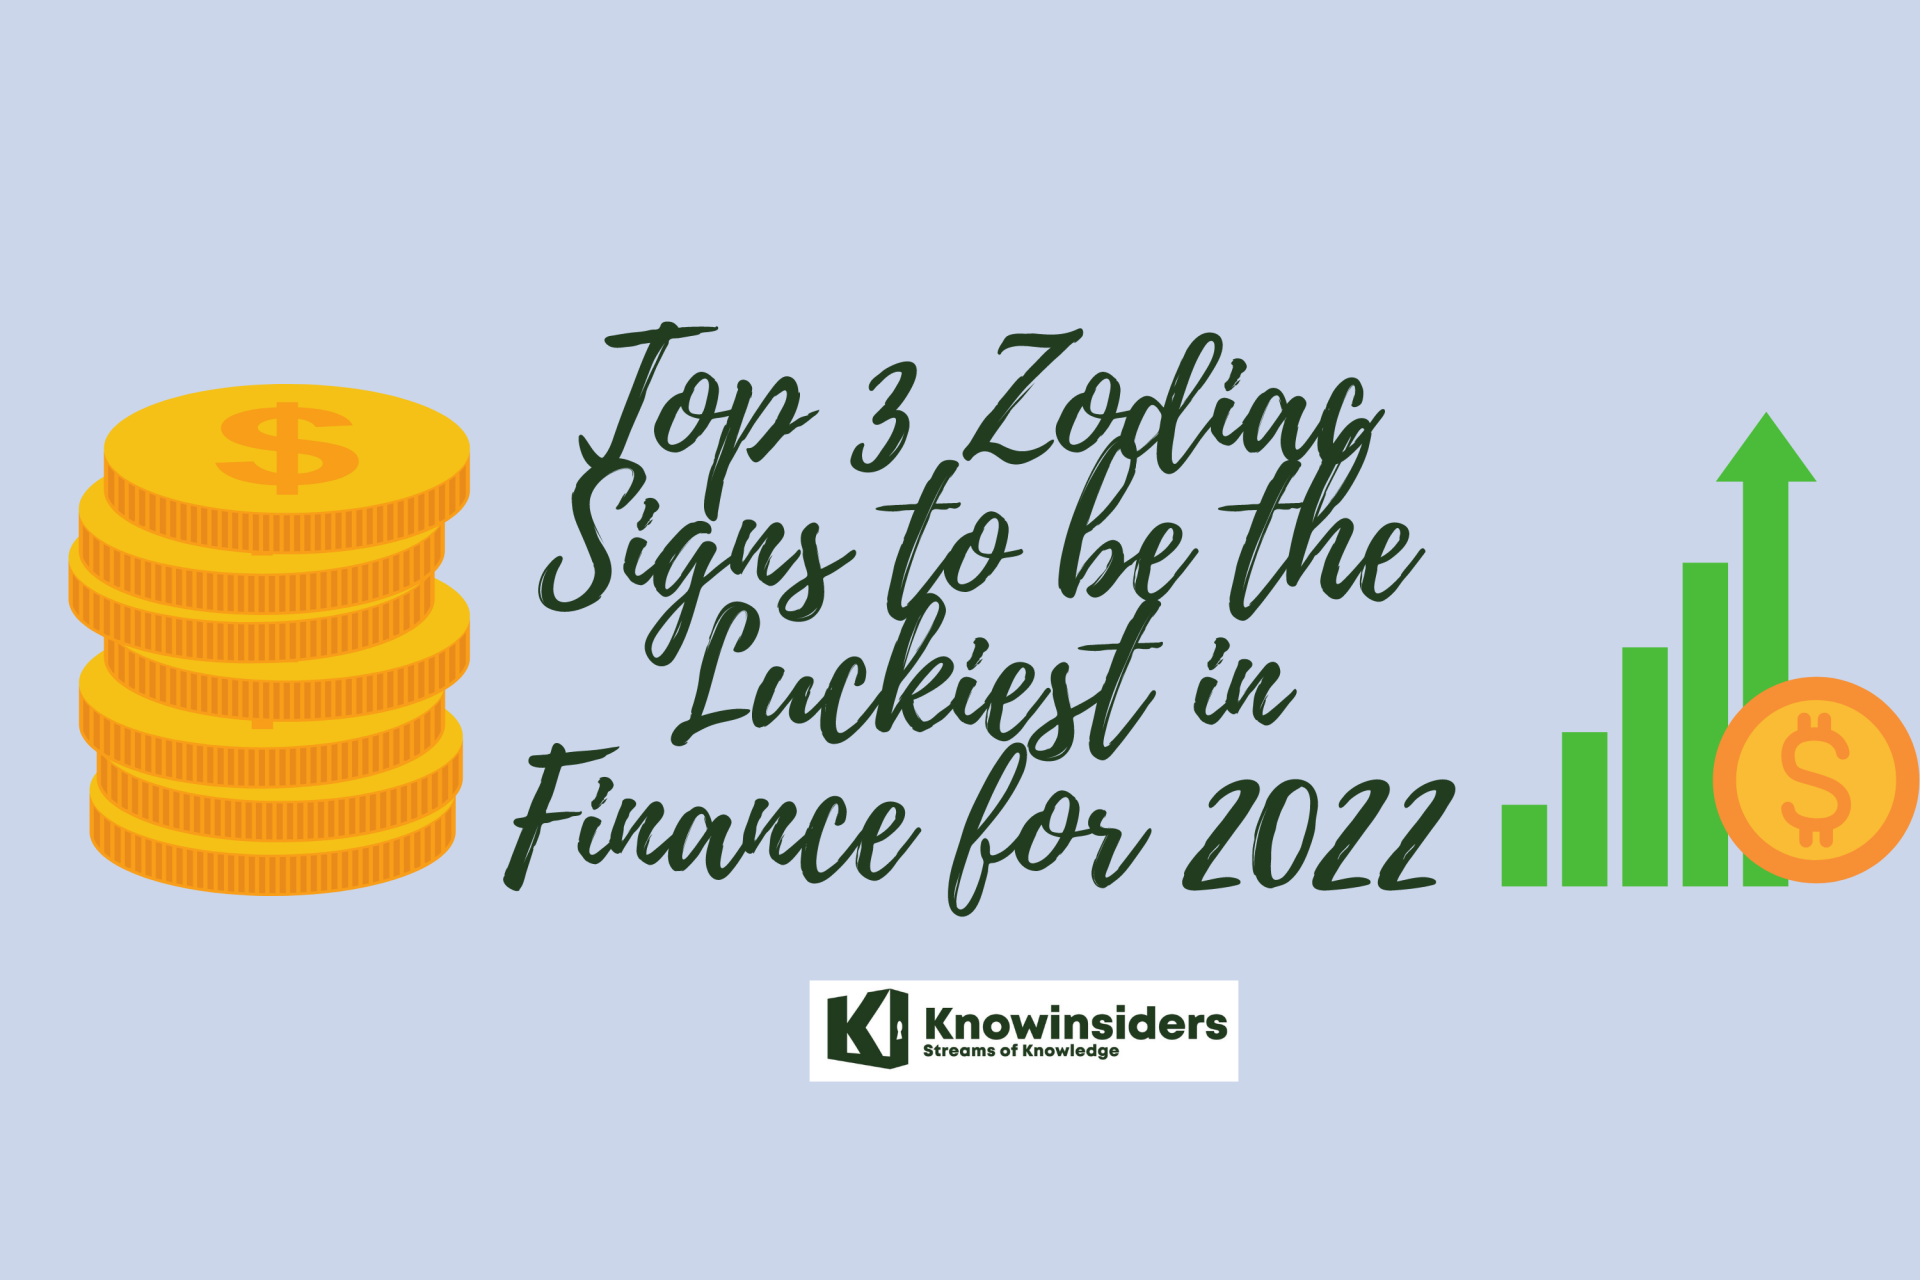 Zodiac Signs to be Luckiest in Finance in 2022. Photo: KnowInsiders